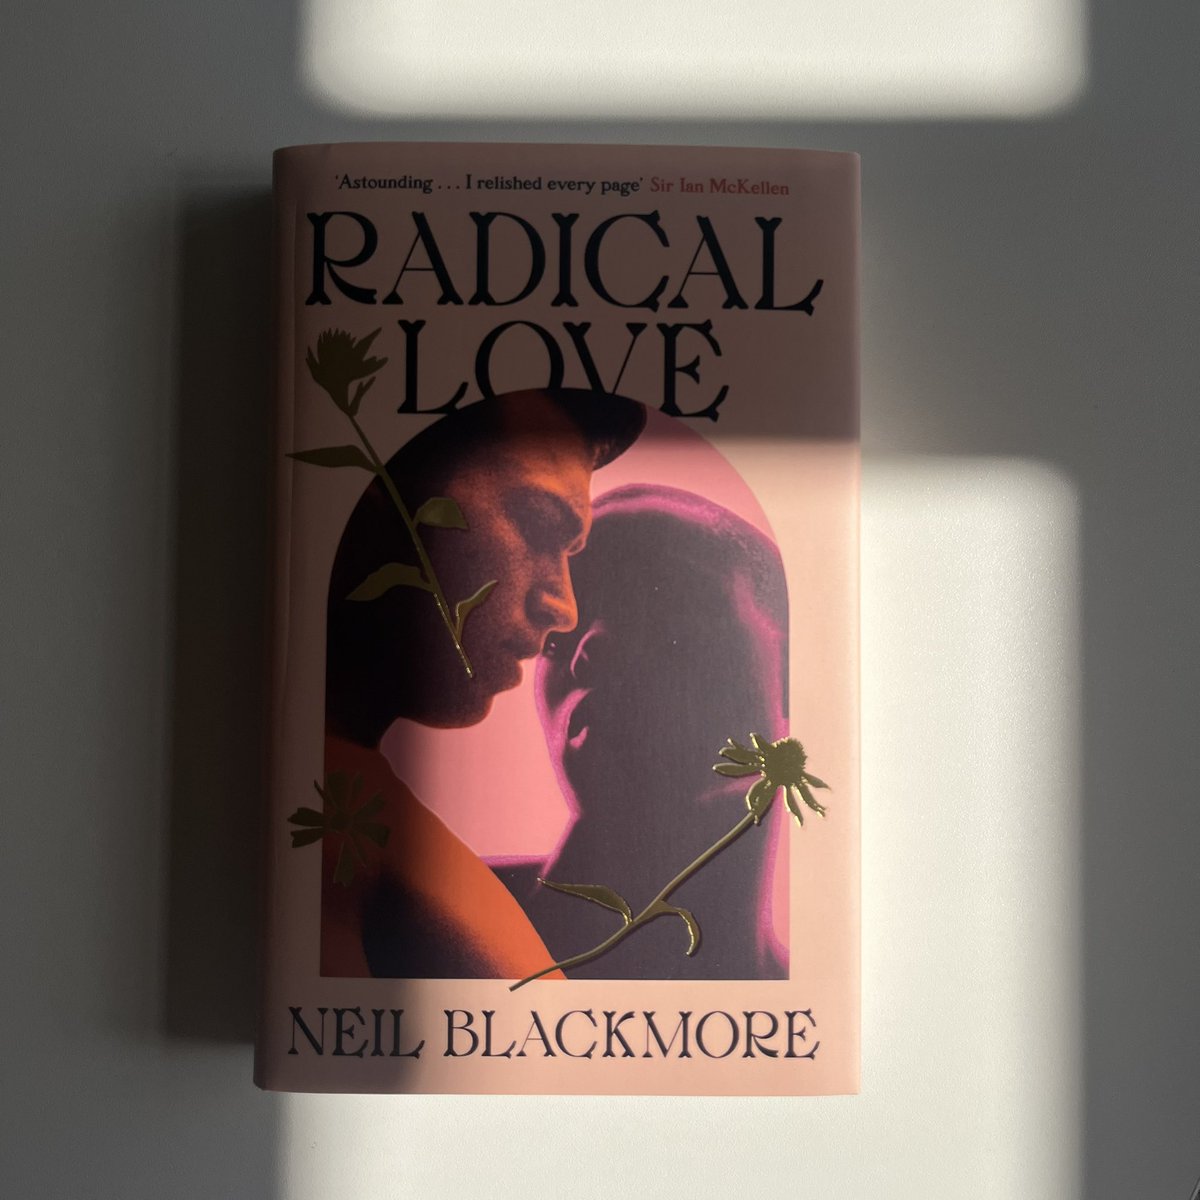 Described by Sir Ian McKellen as ‘astounding’, @NeilBlackmo’s novel RADICAL LOVE is out on 1st June. Proofs have just landed at HH HQ and we are in love! 💌 (Designed by the brilliant Henry Petrides) Pre order #RadicalLove now: bit.ly/3mXxlQS